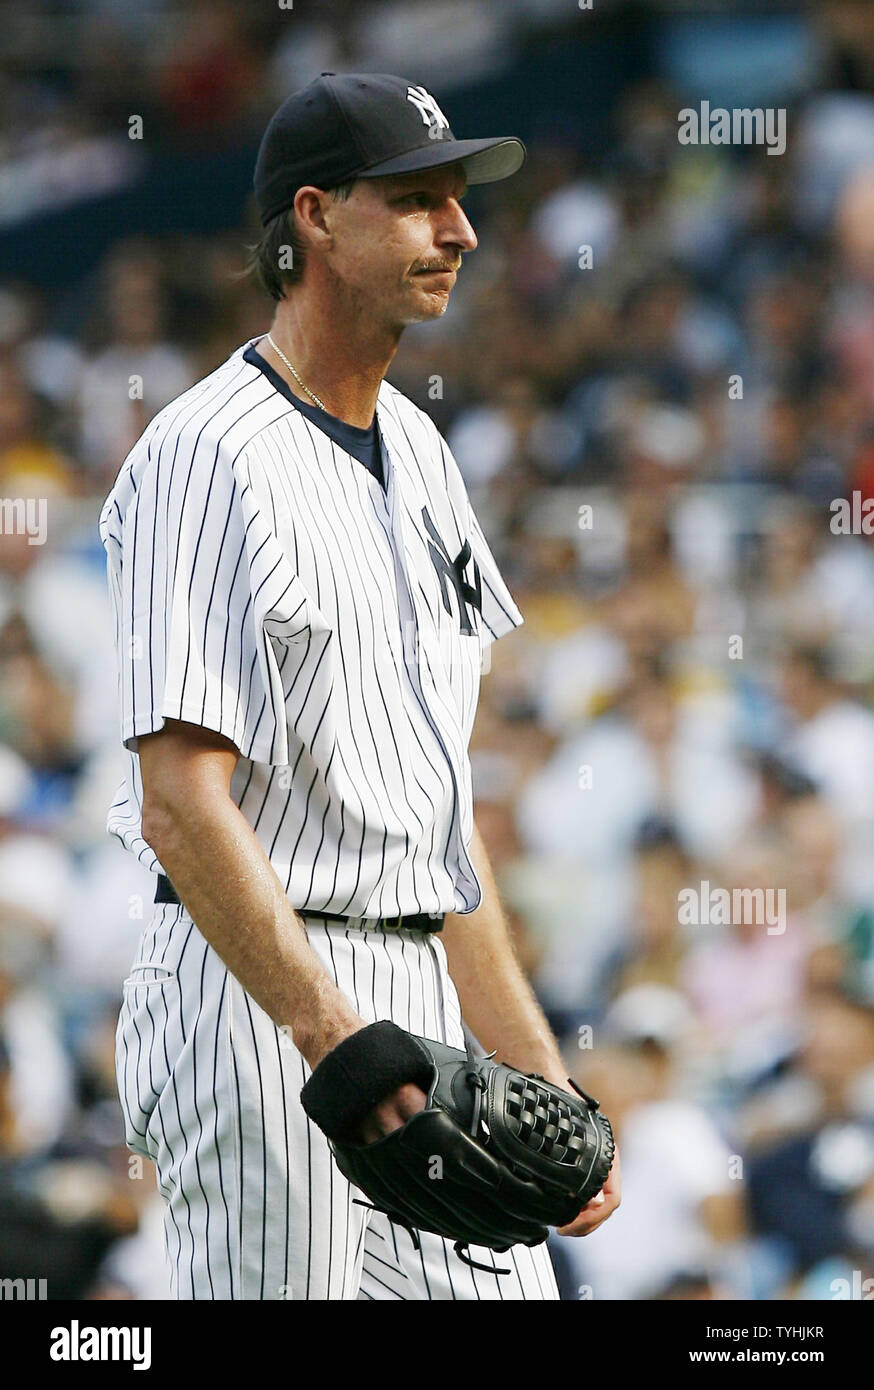 New York Yankees Randy Johnson gives a blank stare in the third inning at  Yankees Stadium in New York City on July 29, 2006. The Tampa Bay Devil Rays  visit the New